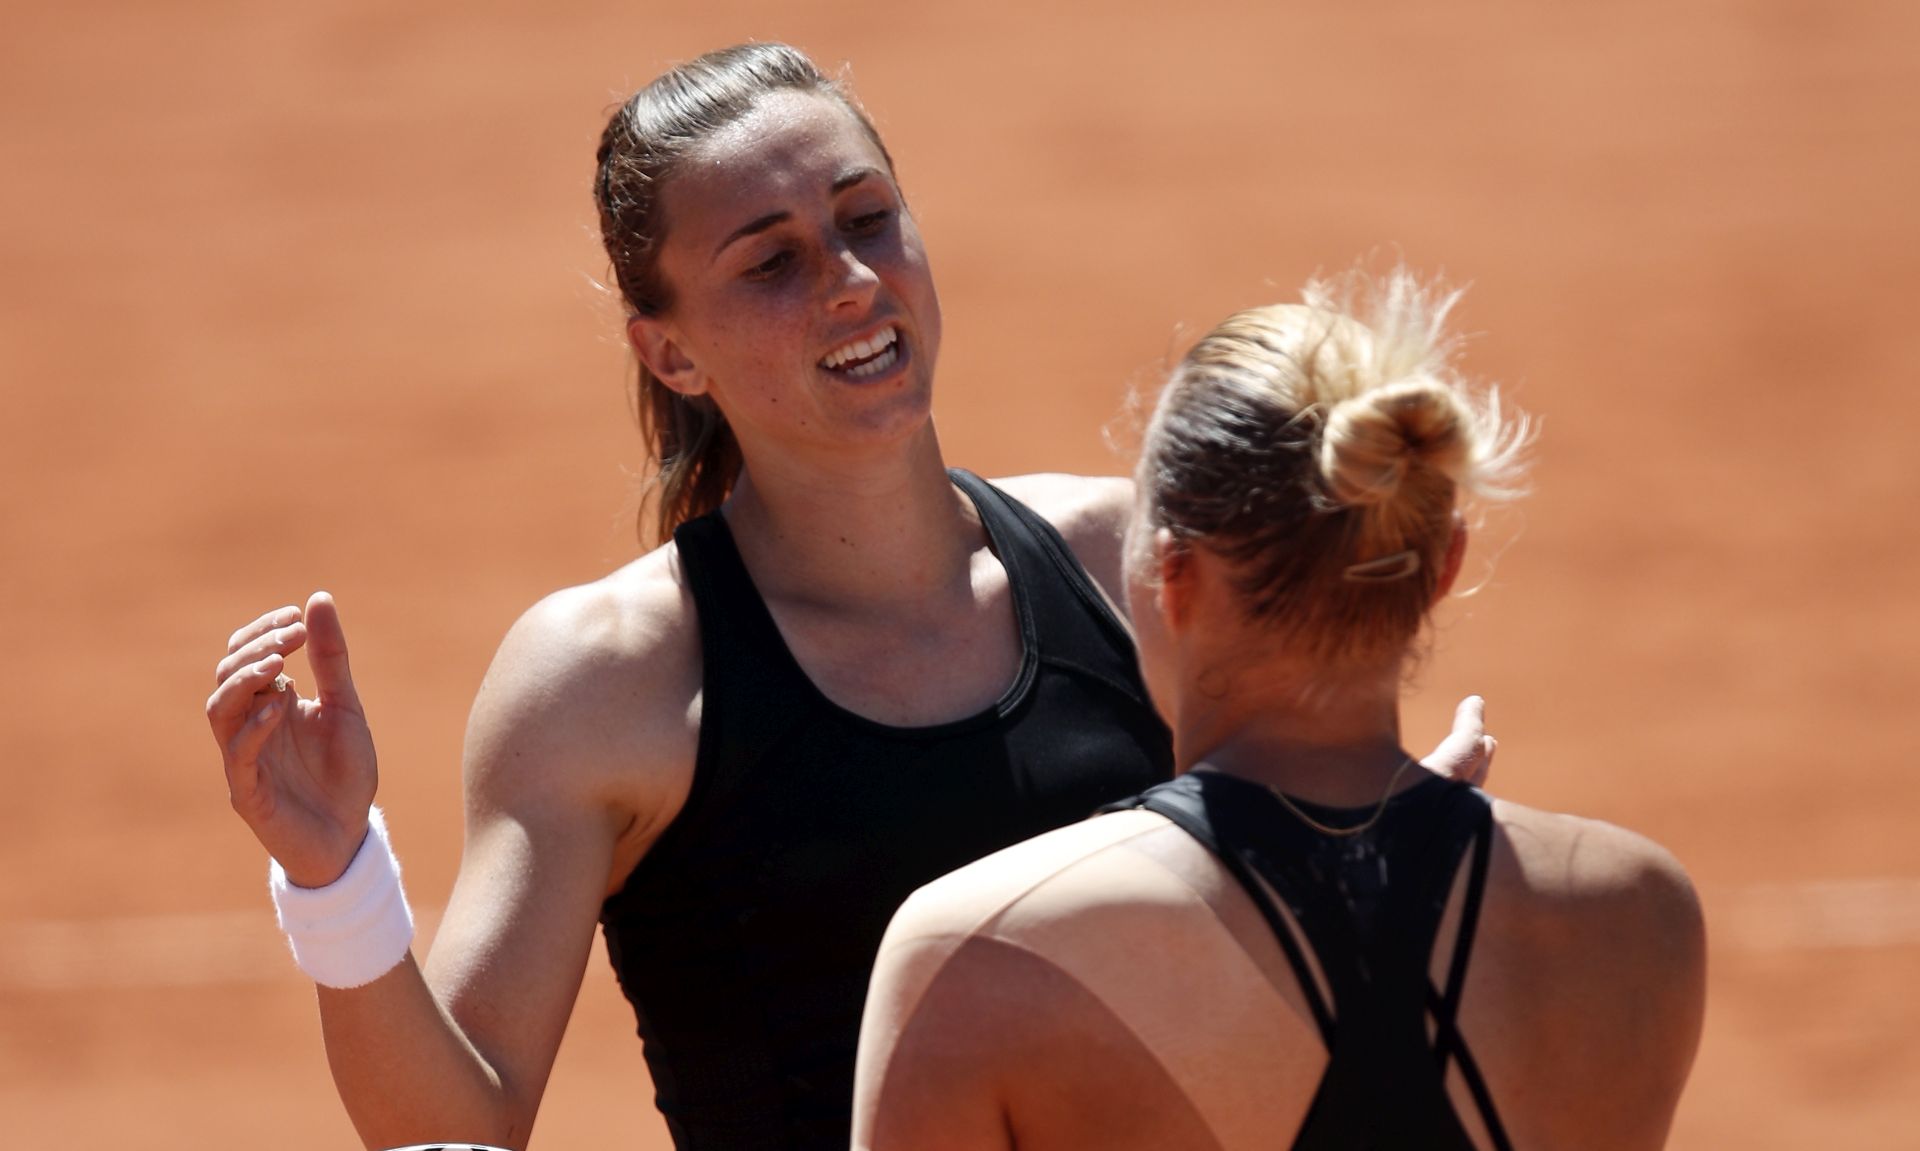 epa07619844 Petra Martic of Croatia (L) reacts after winning against Kaia Kanepi of Estonia (R) their women’s round of 16 match during the French Open tennis tournament at Roland Garros in Paris, France, 02 June 2019.  EPA/YOAN VALAT